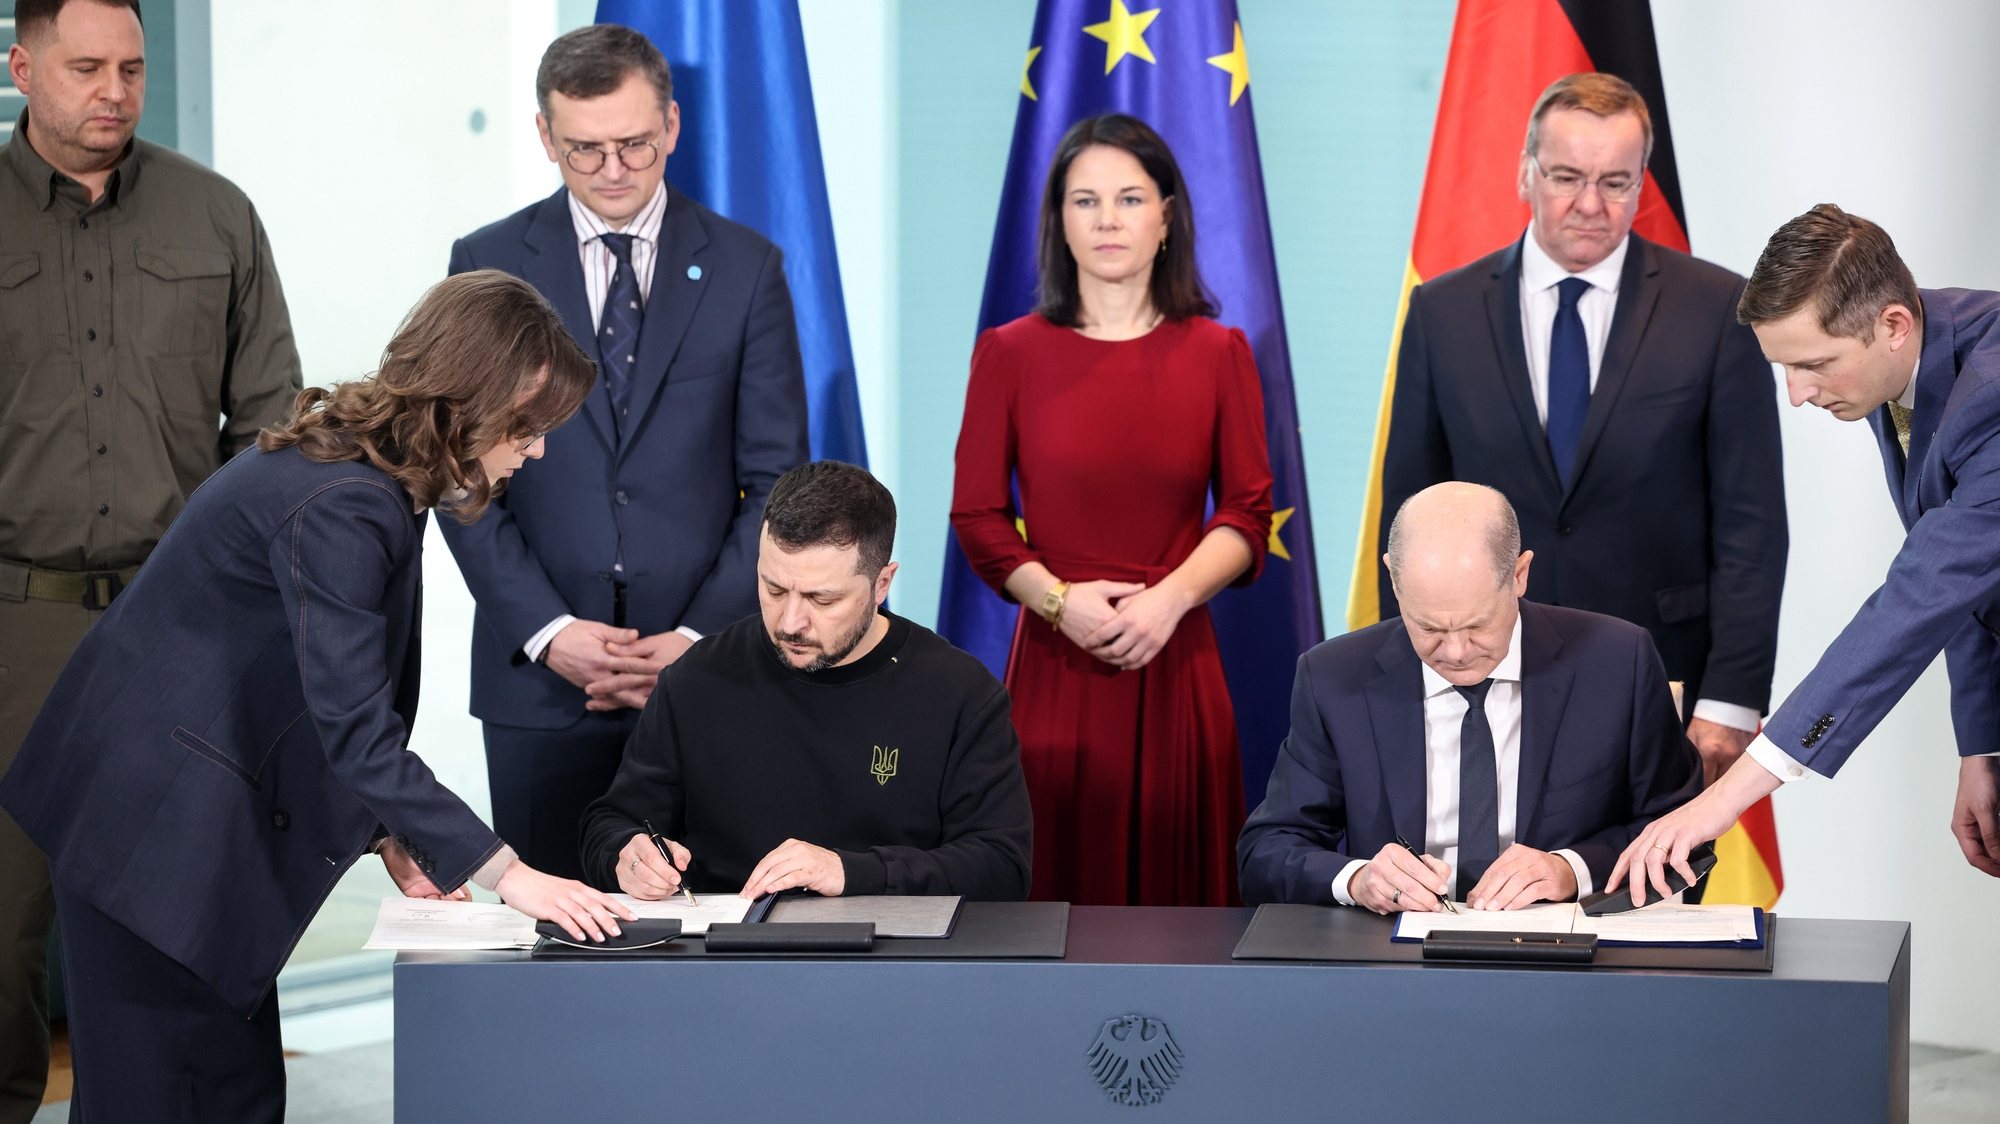 epa11157556 German Chancellor Olaf Scholz (front, C-R) and Ukraine&#039;s President Volodymyr Zelensky (front, C-L) sign a &#039;Bilateral agreement on security commitments and long-term support&#039; as German Foreign Minister Annalena Baerbock (back, C), Ukrainian Foreign Minister Dmytro Kuleba (back, 2-L) and German Defense Minister Boris Pistorius (back, R) look on during a meeting at the German Chancellery building during Zelensky’s visit to Berlin, Germany, 16 February 2024.  EPA/CLEMENS BILAN